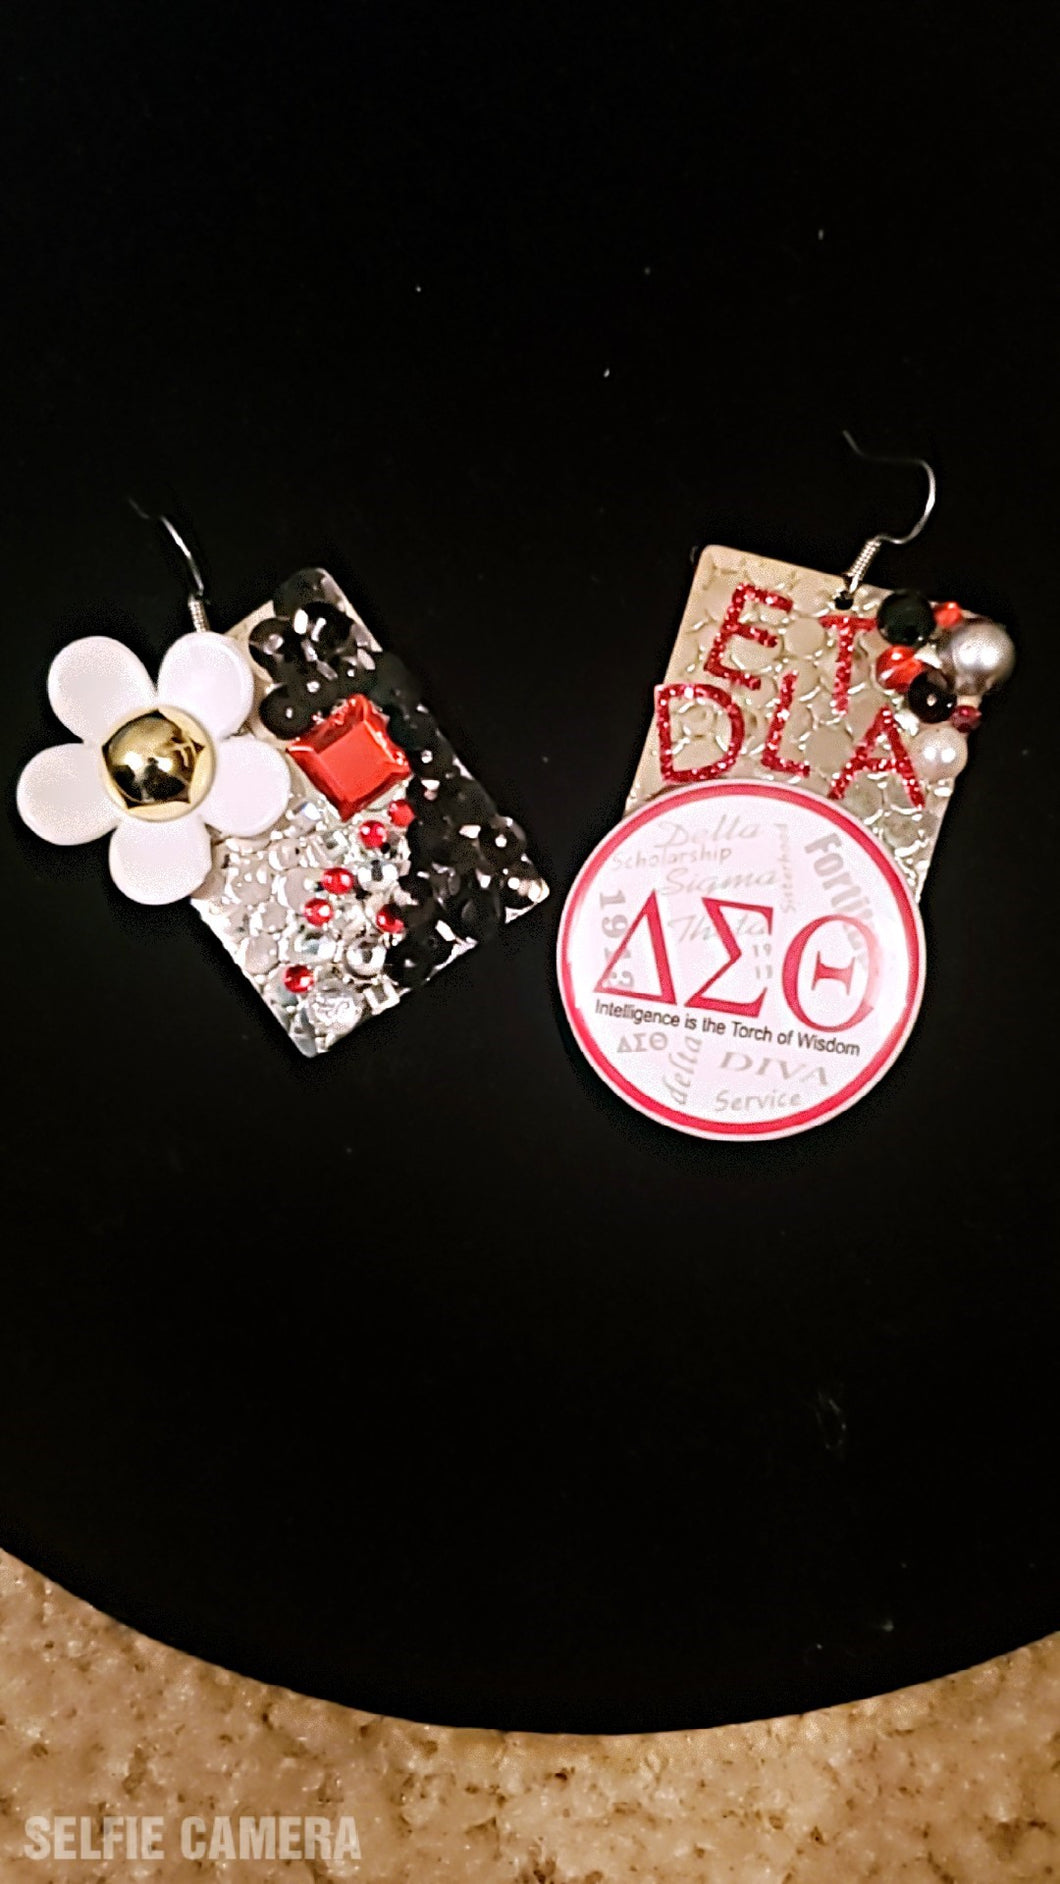 Custom made square Delta earrings_(the Delta novelty buttons are publicly purchased from a license greek-establishment)